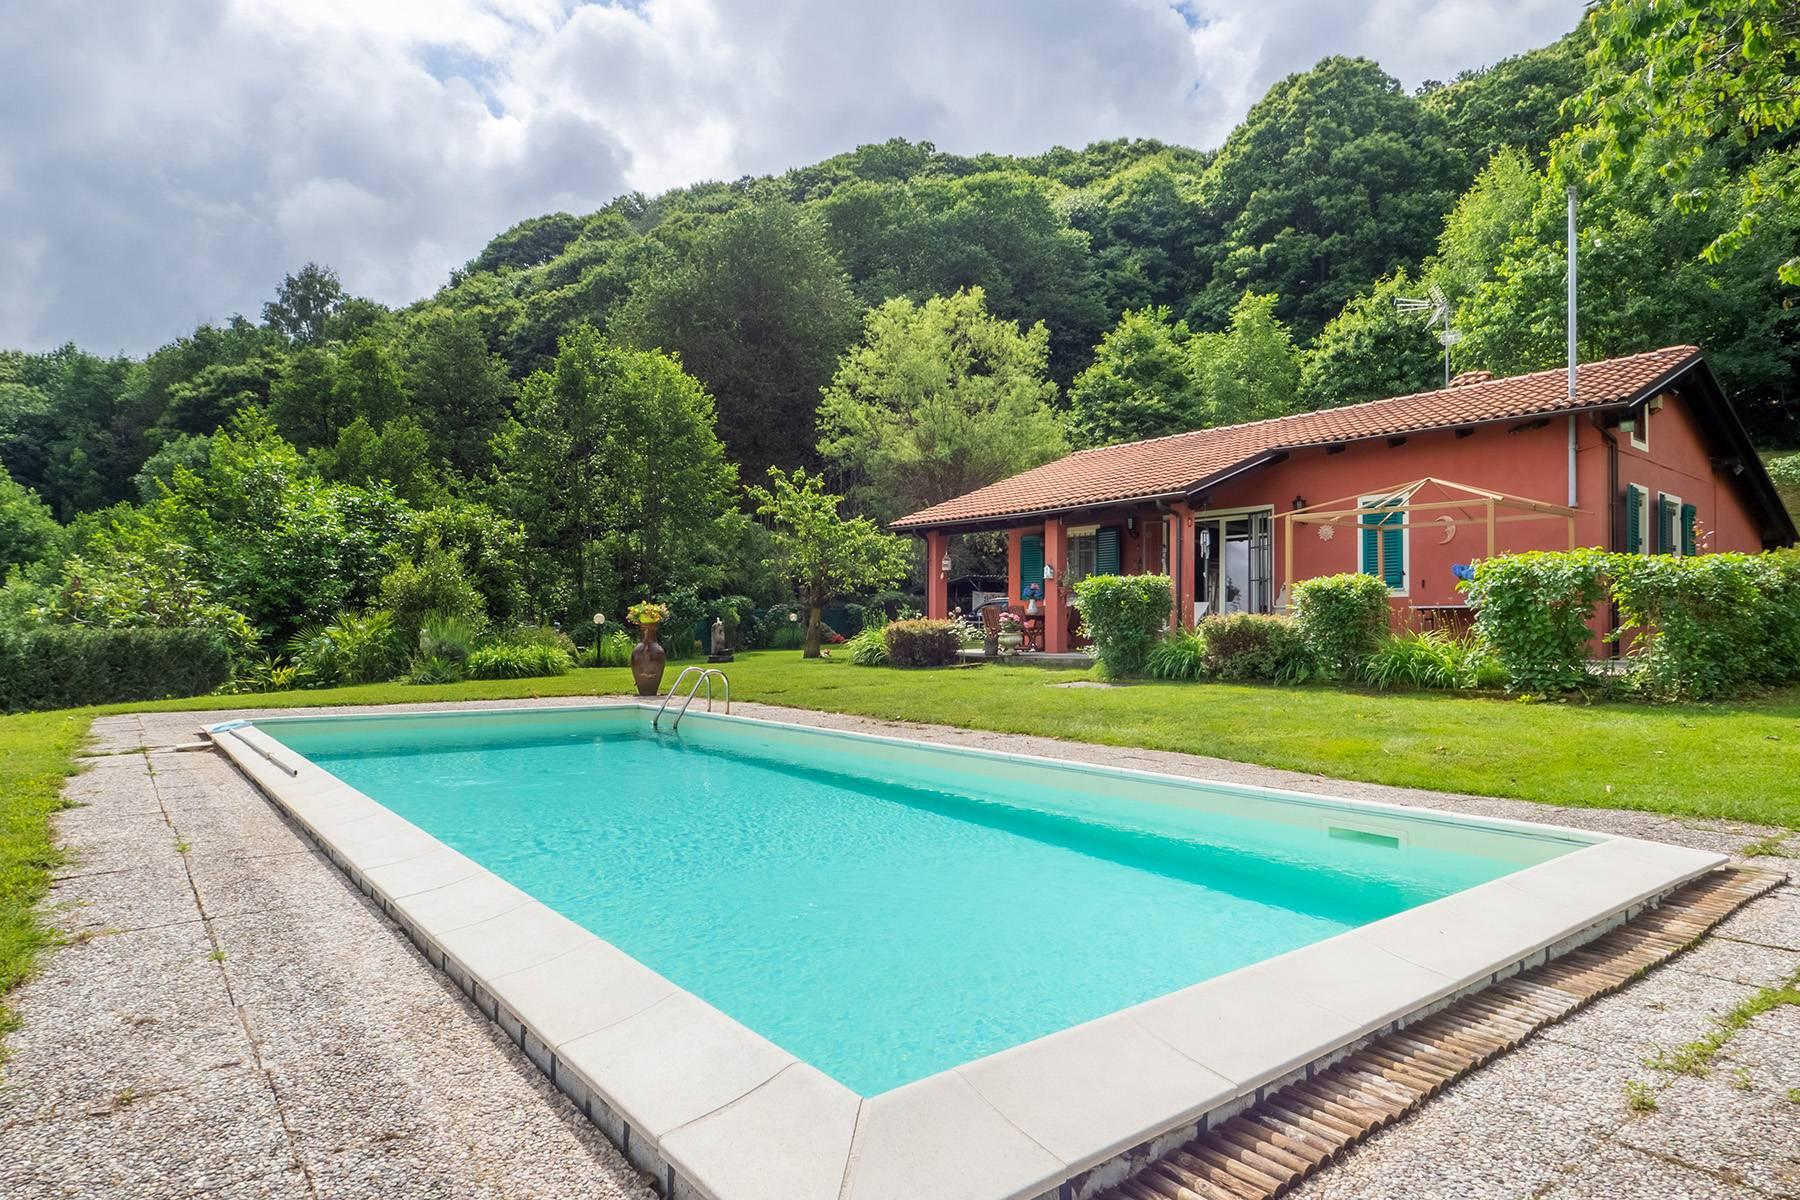 Farmhouse with swimming pool nestled in the greenery - 1